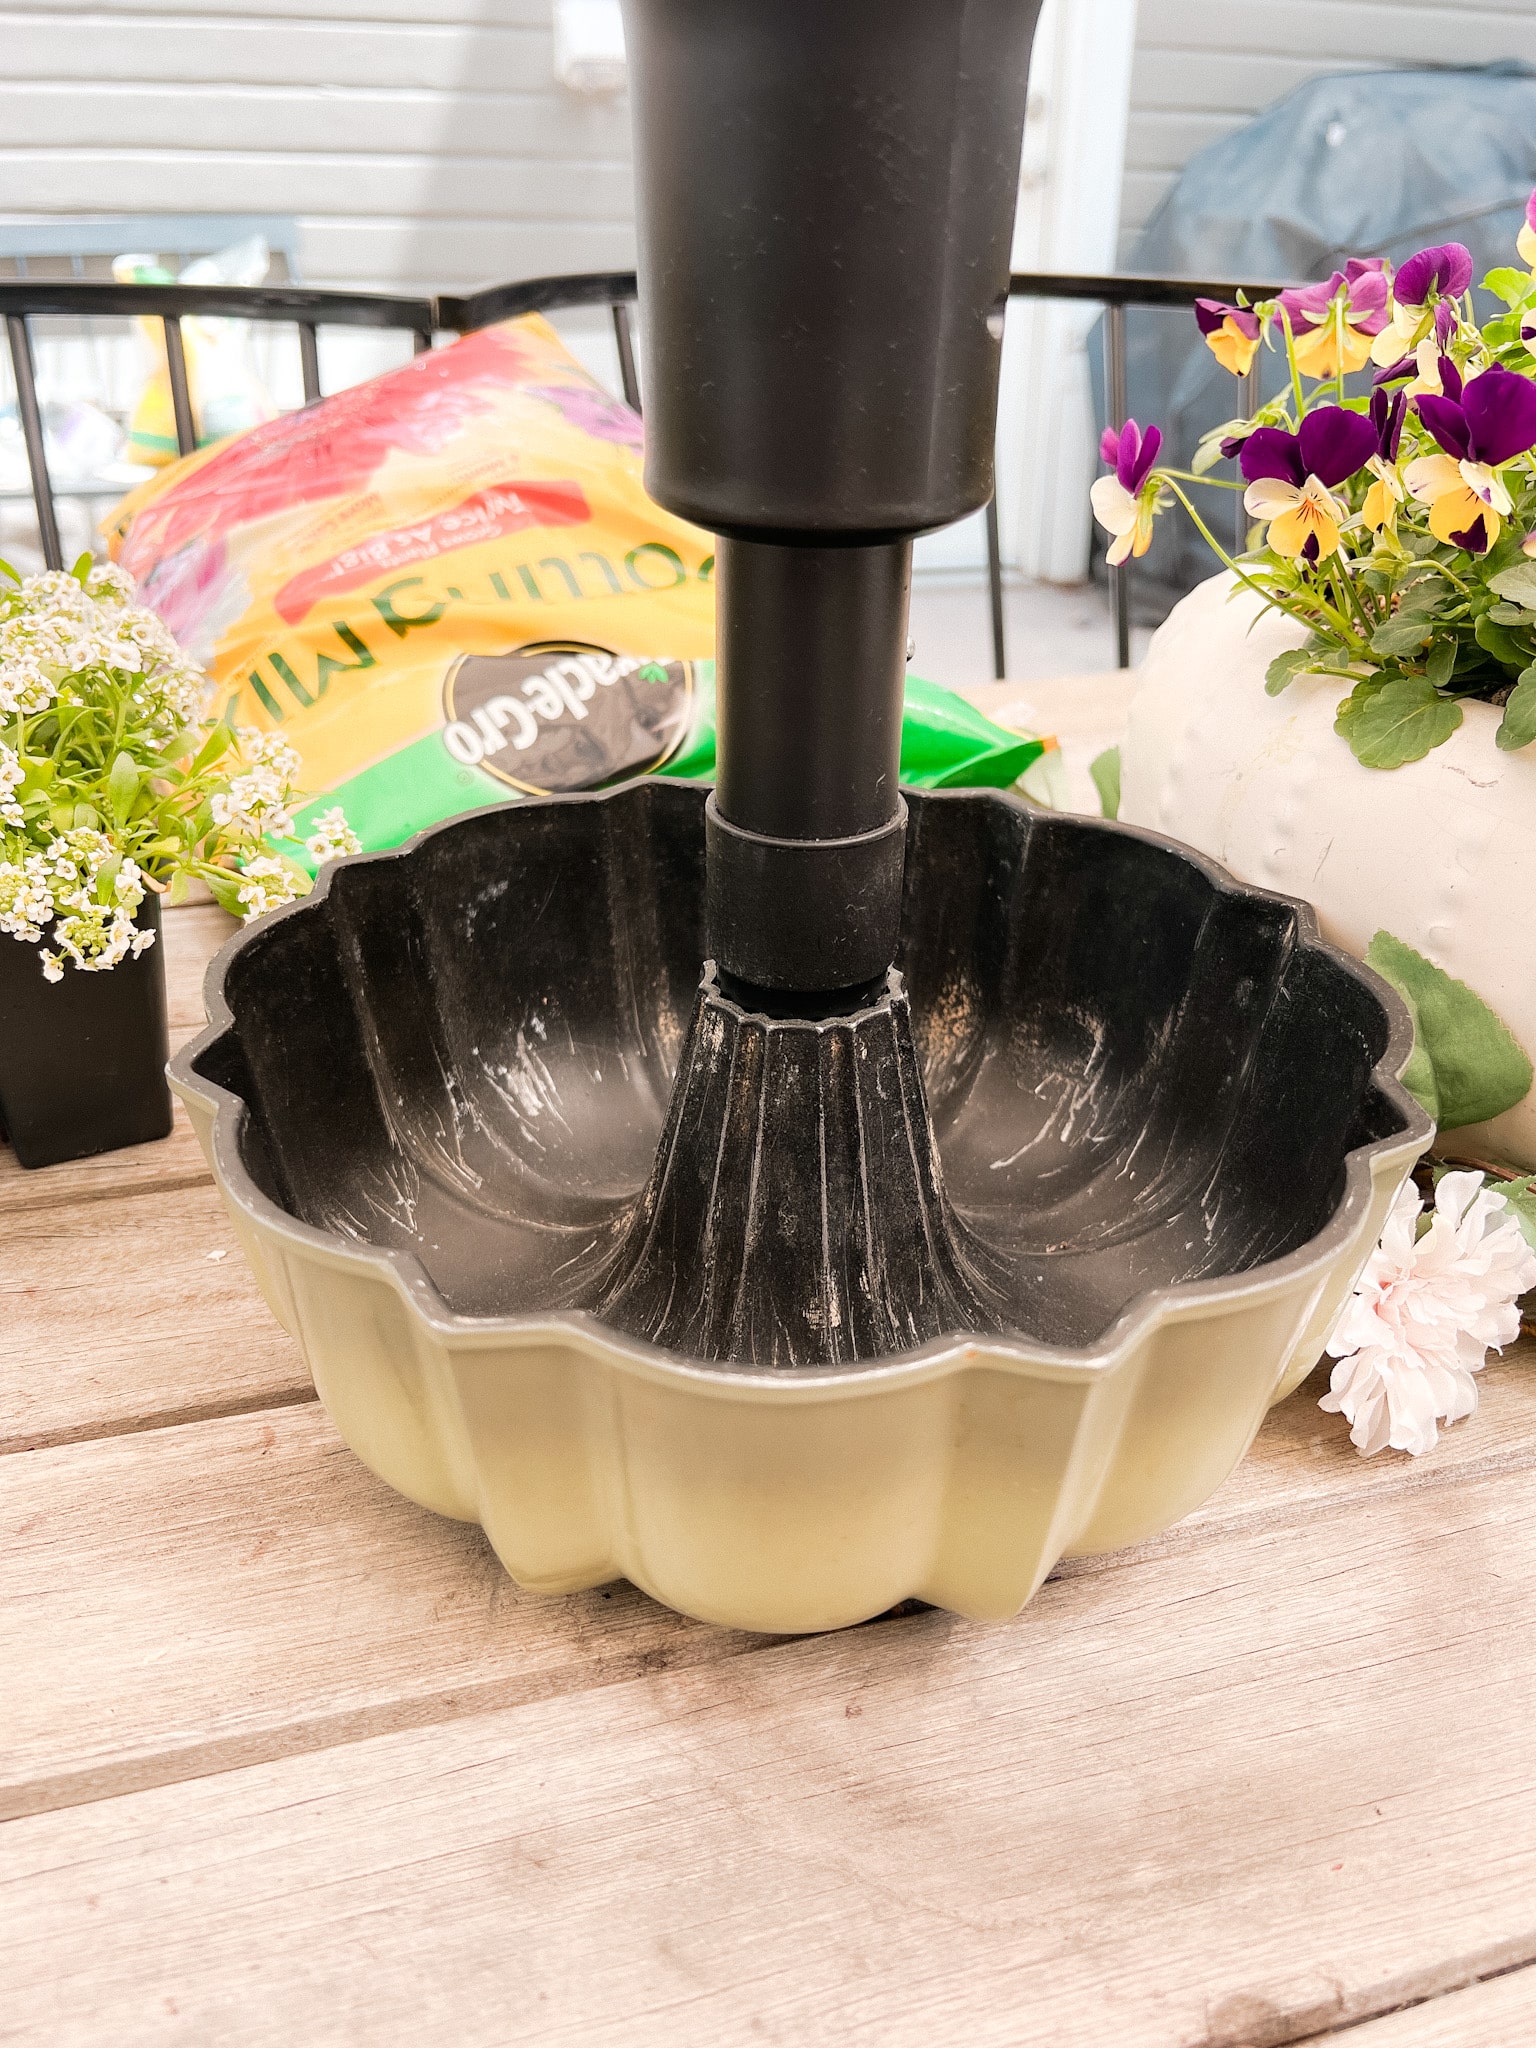 how to upcycle a bundt pan into a patio planter